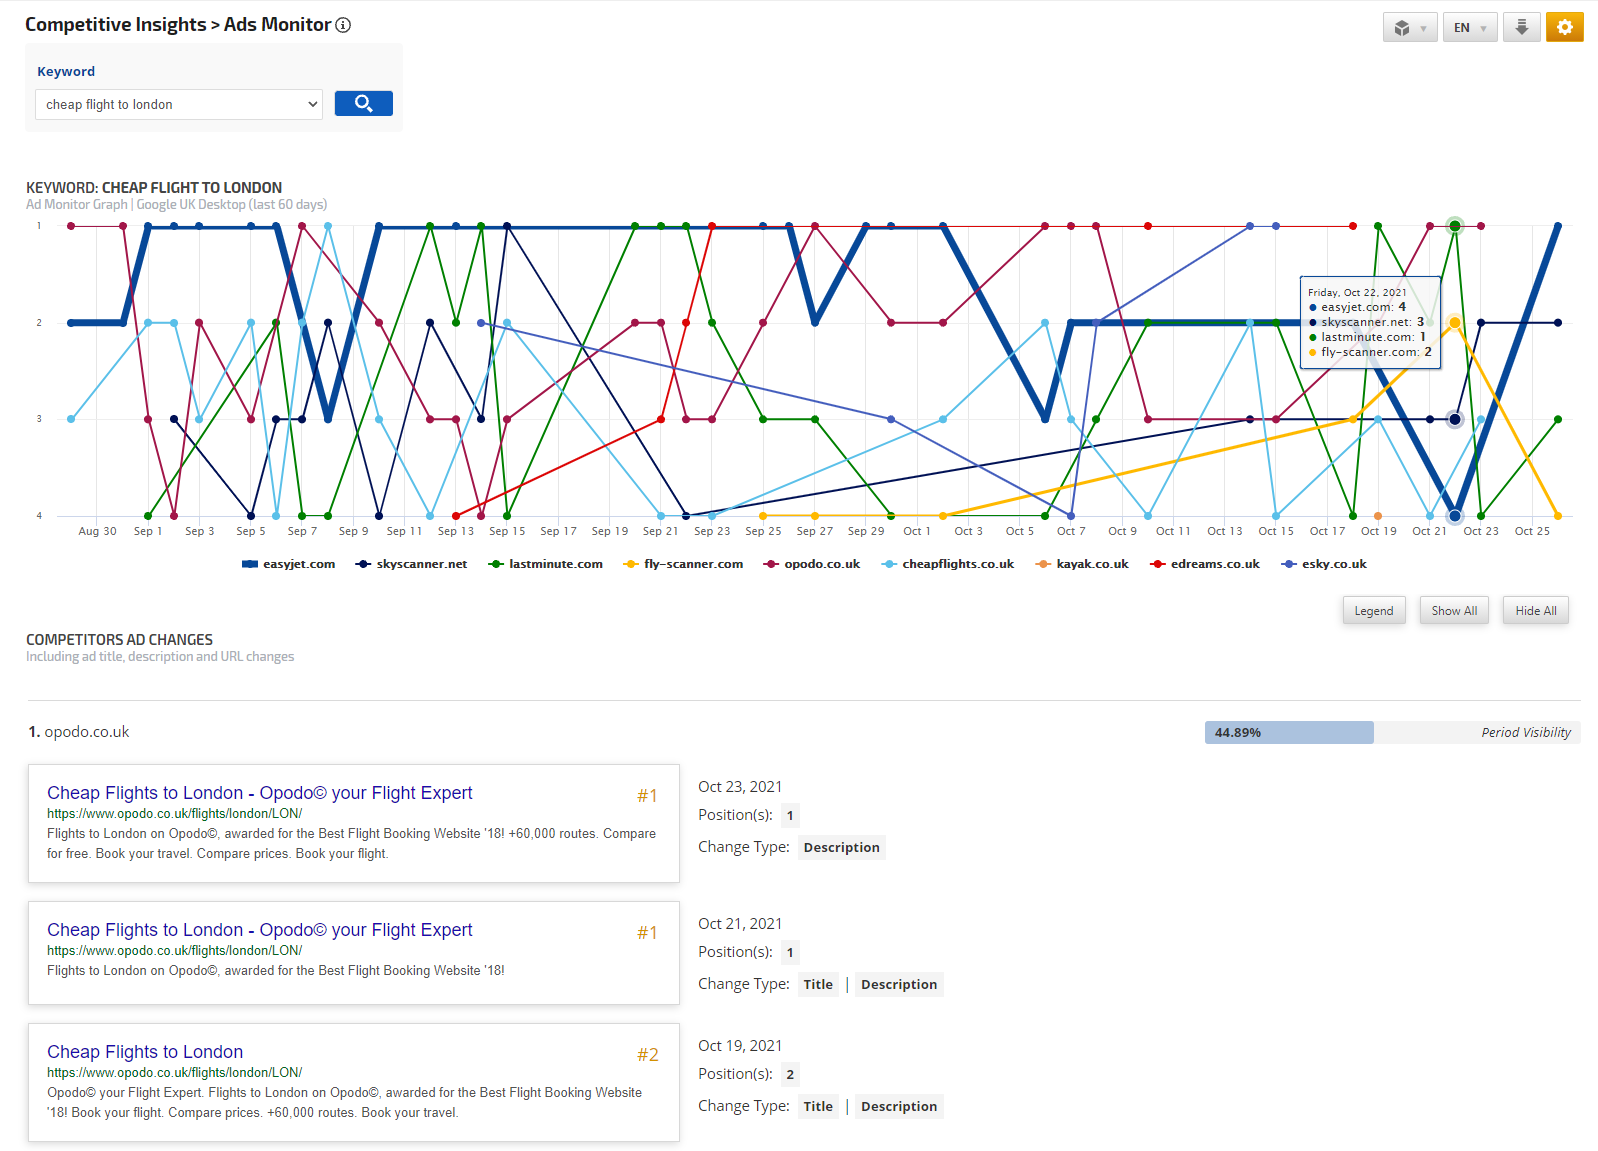 AdWords Monitor displaying top 10 competitors 